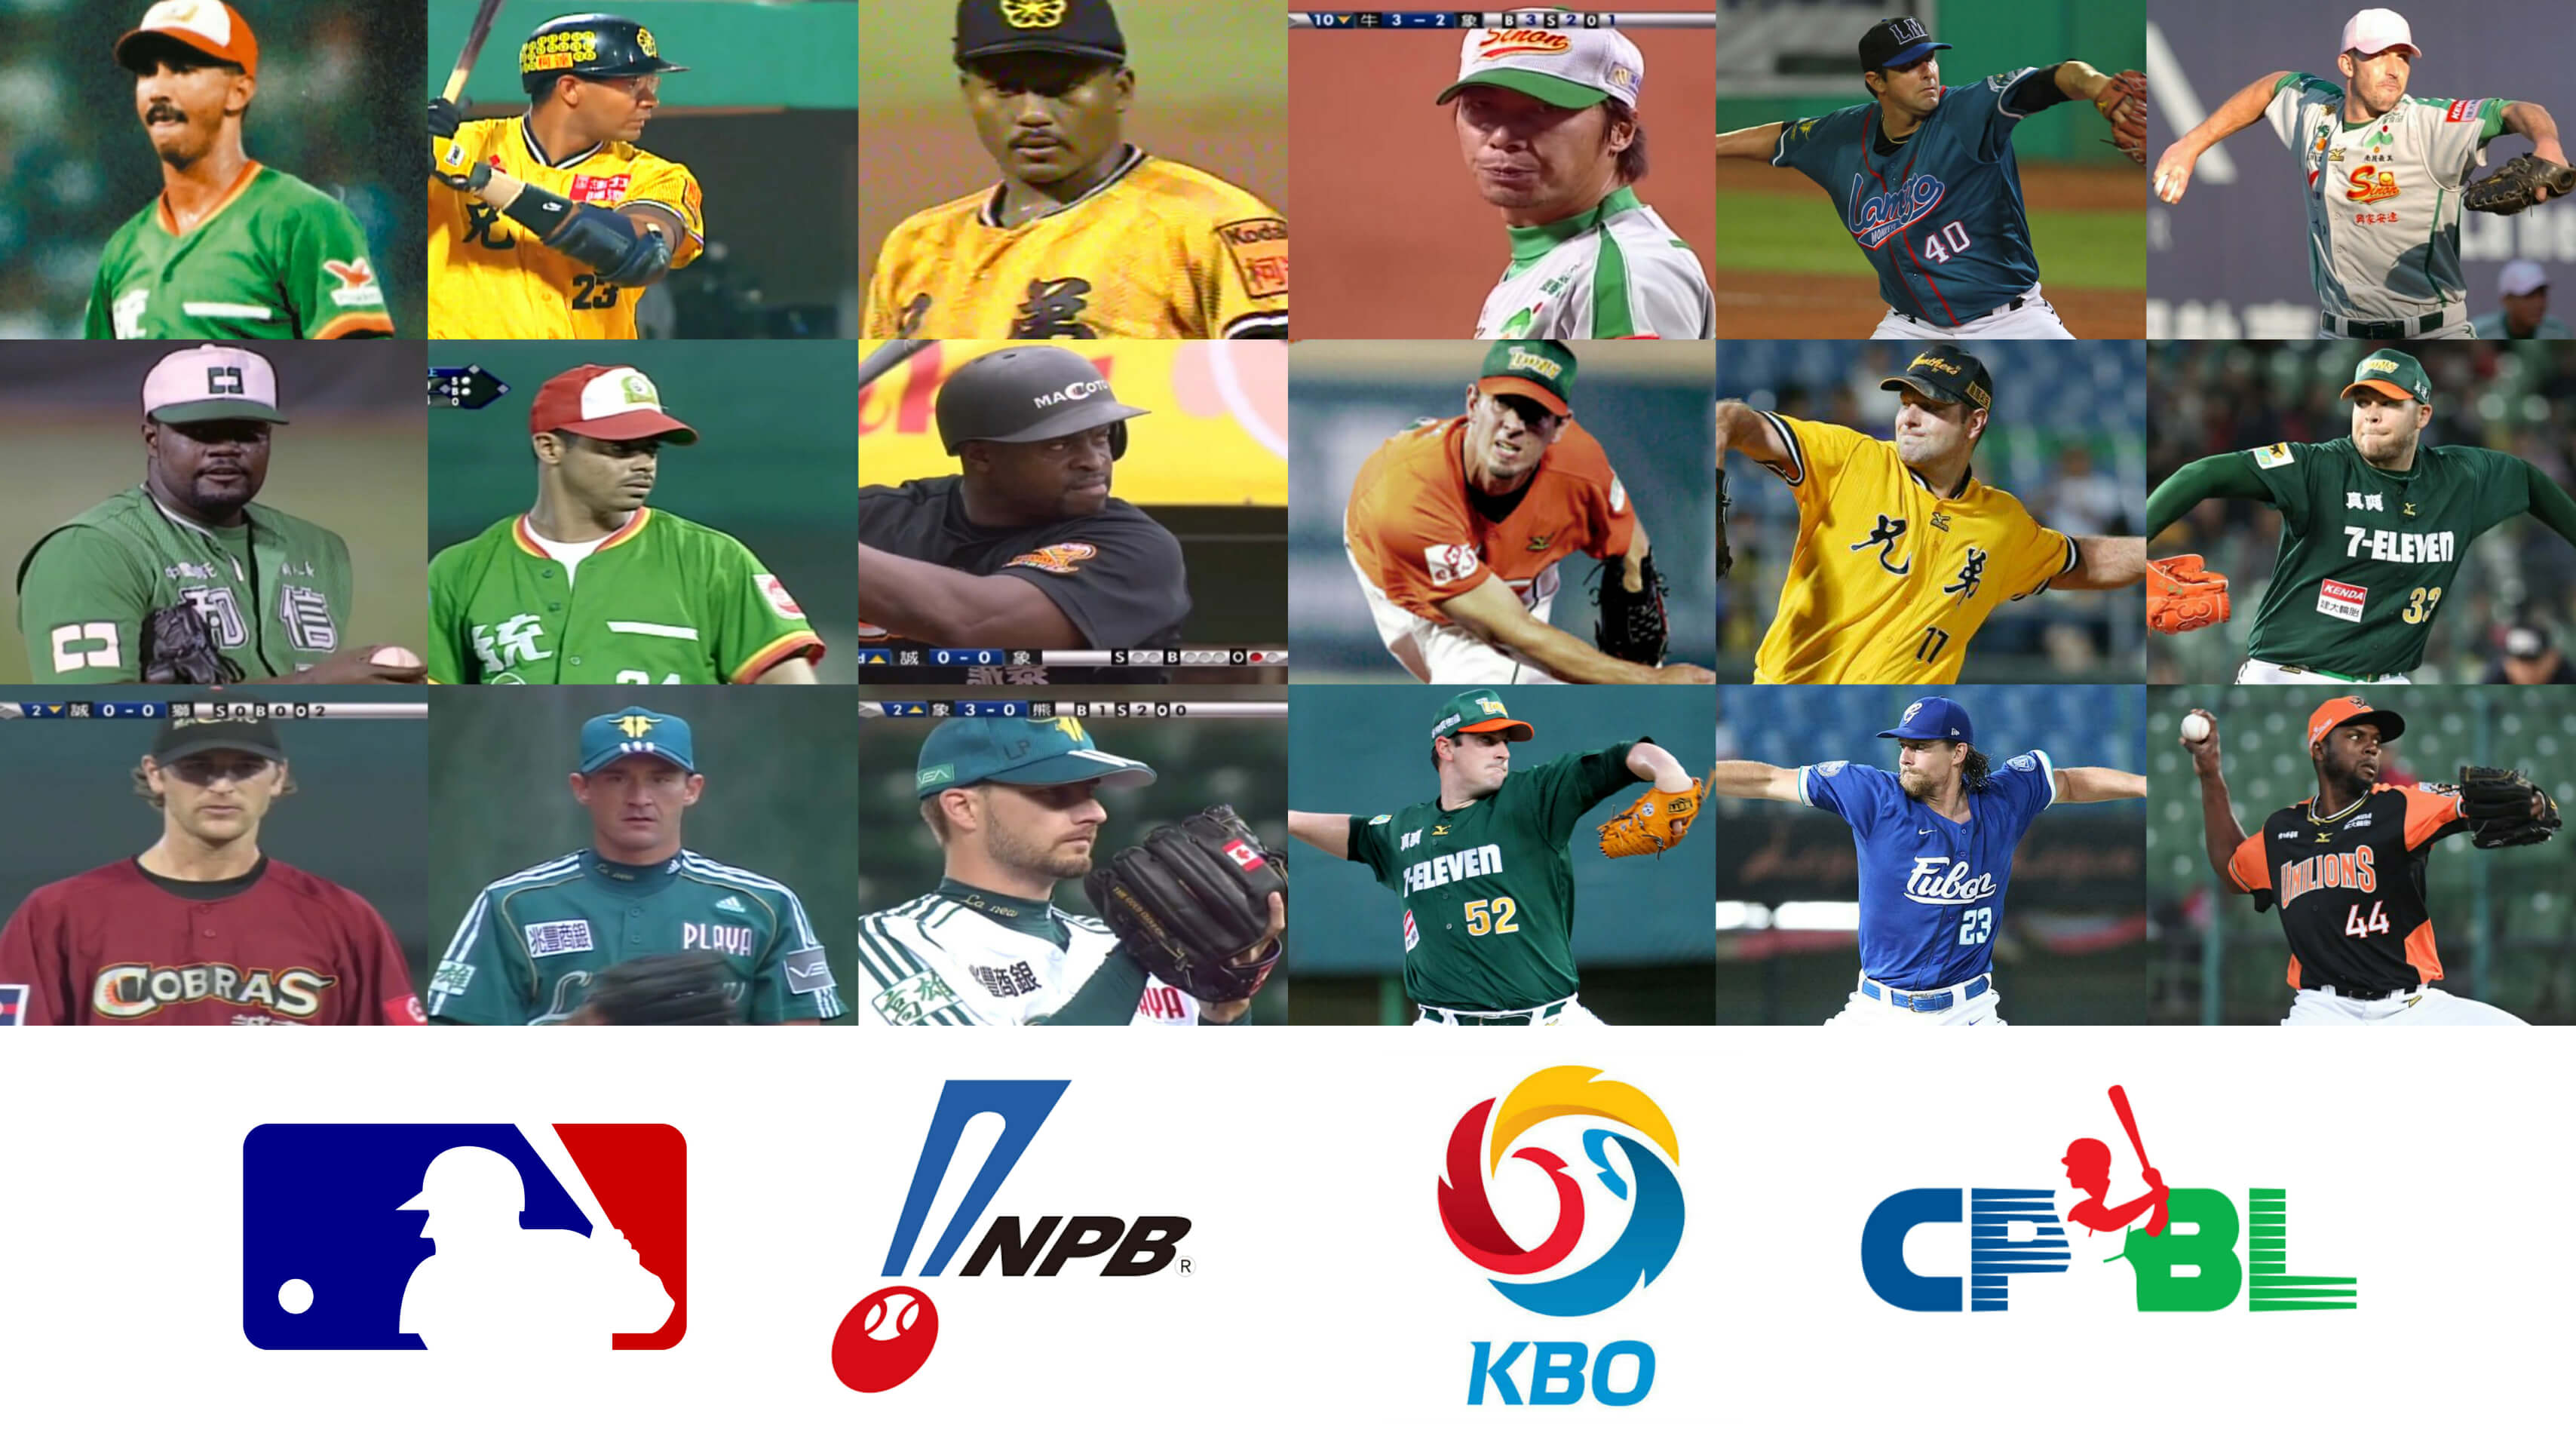 From Japan's NPB to South Korea's KBO and here are some KBO